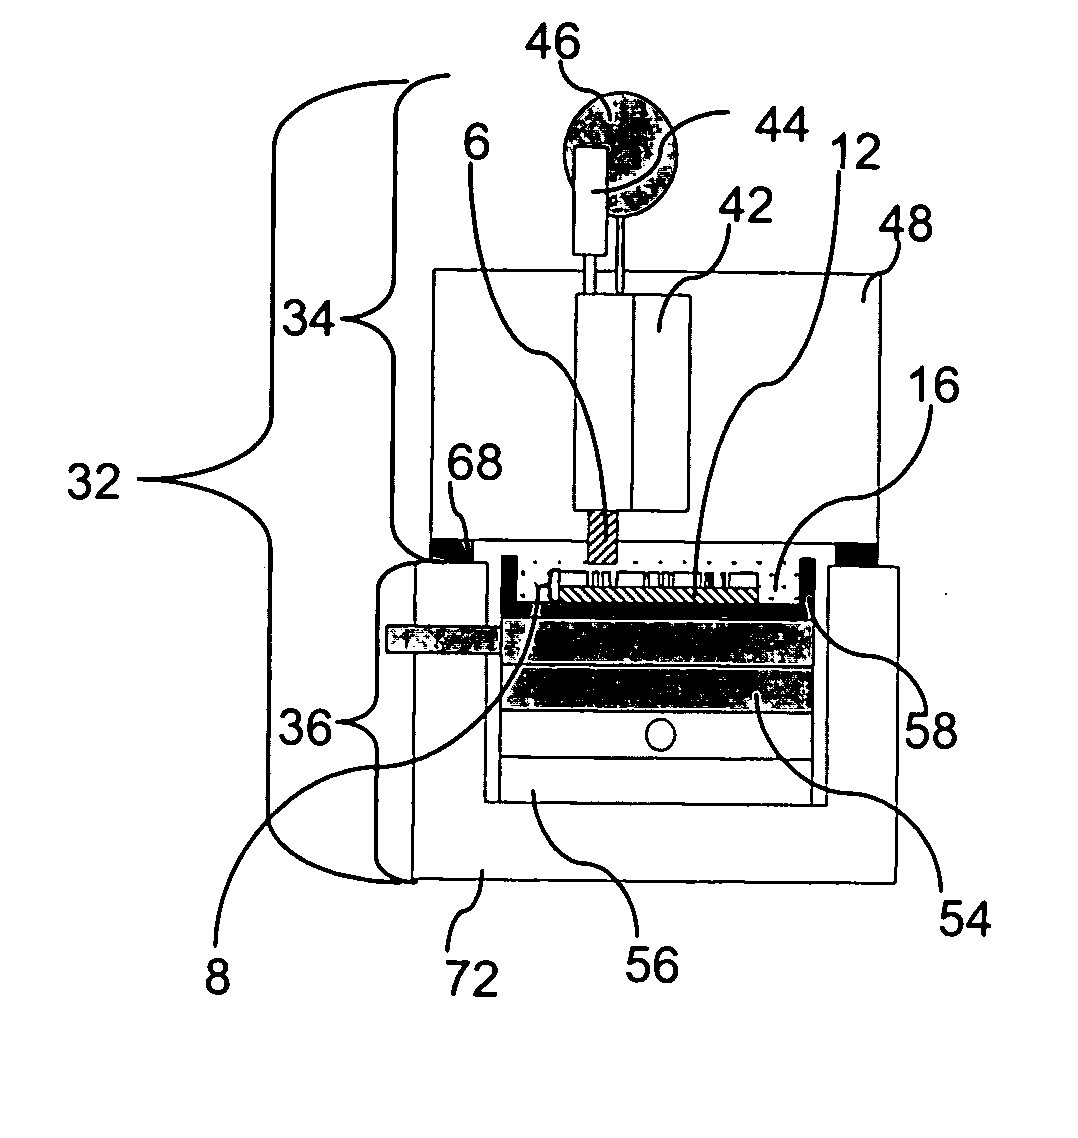 Electrochemical fabrication process using directly patterned masks